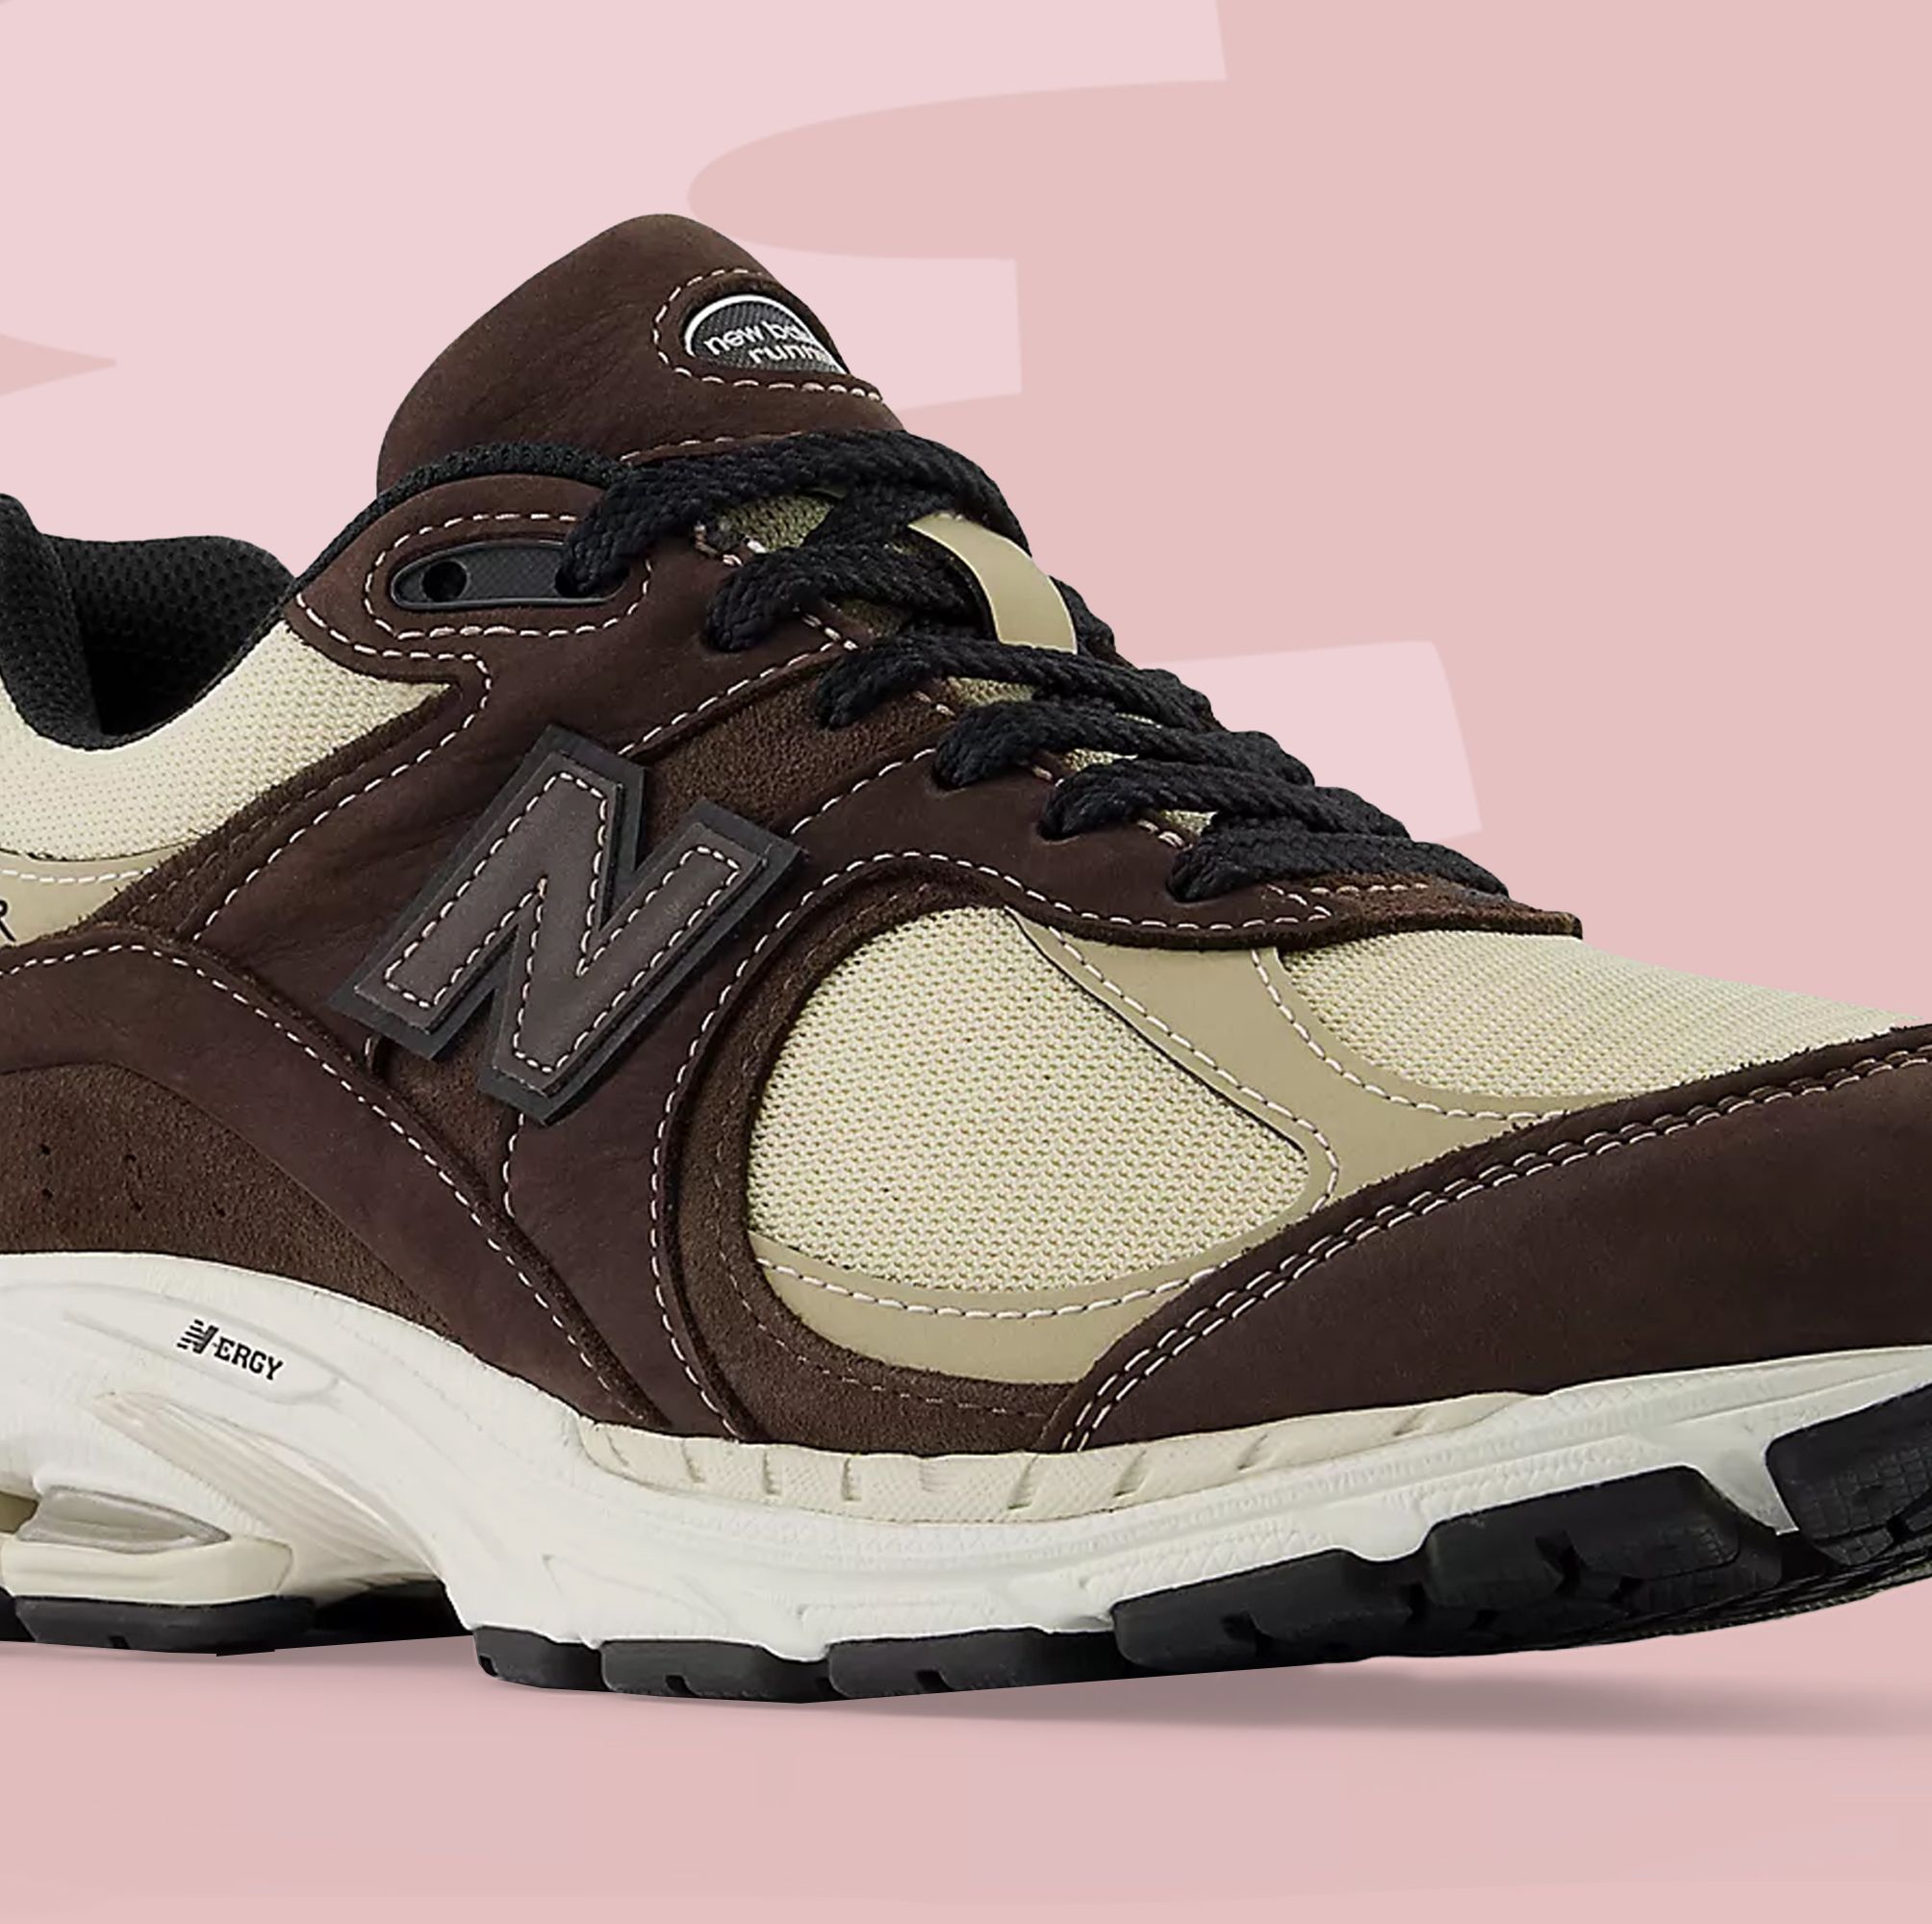 The 20 Best New Balance Shoes of All Time